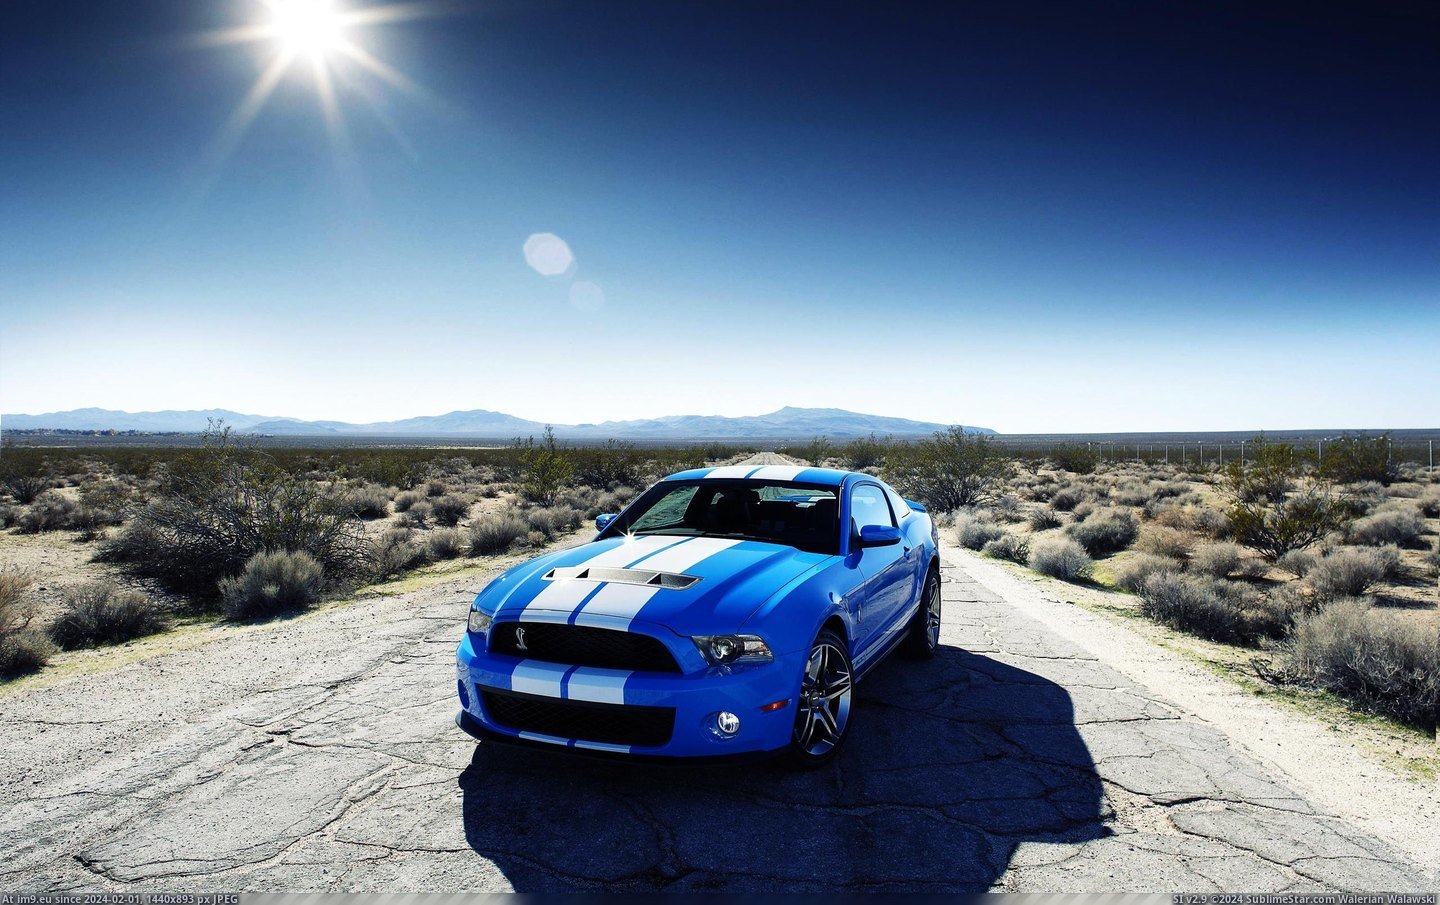 #Wallpaper #Wide #Ford #Gt500 #Car #Shelby Ford Shelby Gt500 Car Wide HD Wallpaper Pic. (Image of album Unique HD Wallpapers))